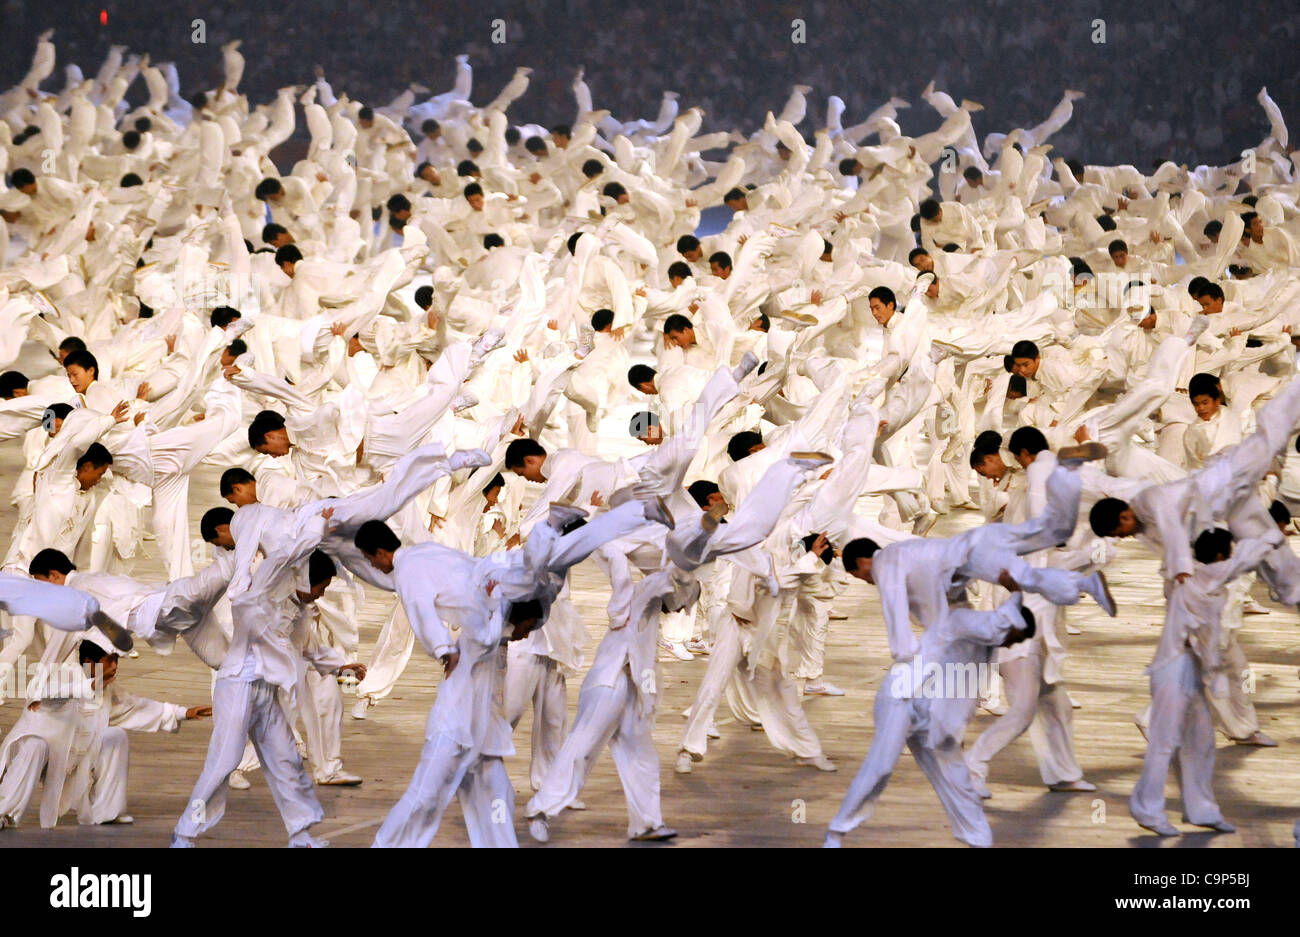 AUGUST 8, 2008 - Opening Ceremony : Performers dance during the opening ceremony for the 2008 Beijing Summer Olympics Games at the National Stadium on August 8, 2008 in Beijing, China. (Photo by AFLO SPORT) [0005] Stock Photo